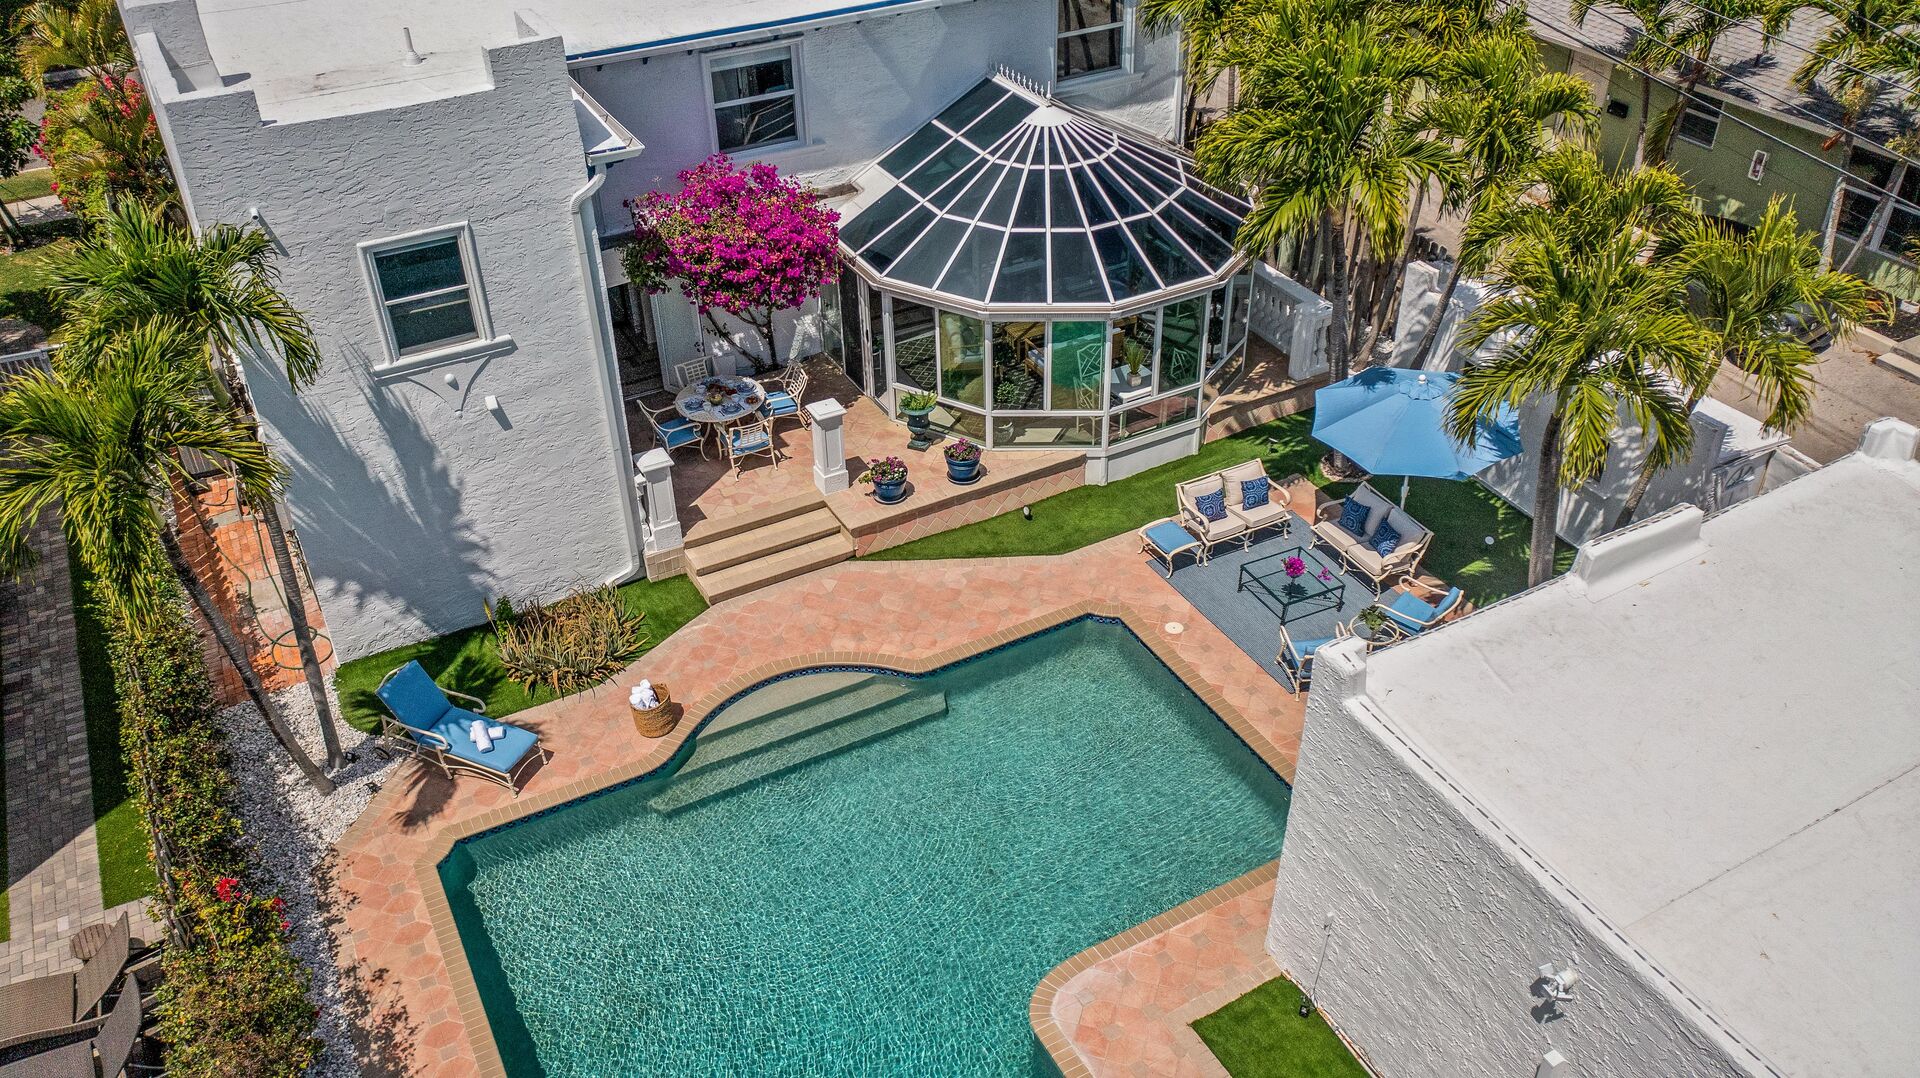 View of Indigo Key from above! Soak in the heated pool and let your worries fade away.